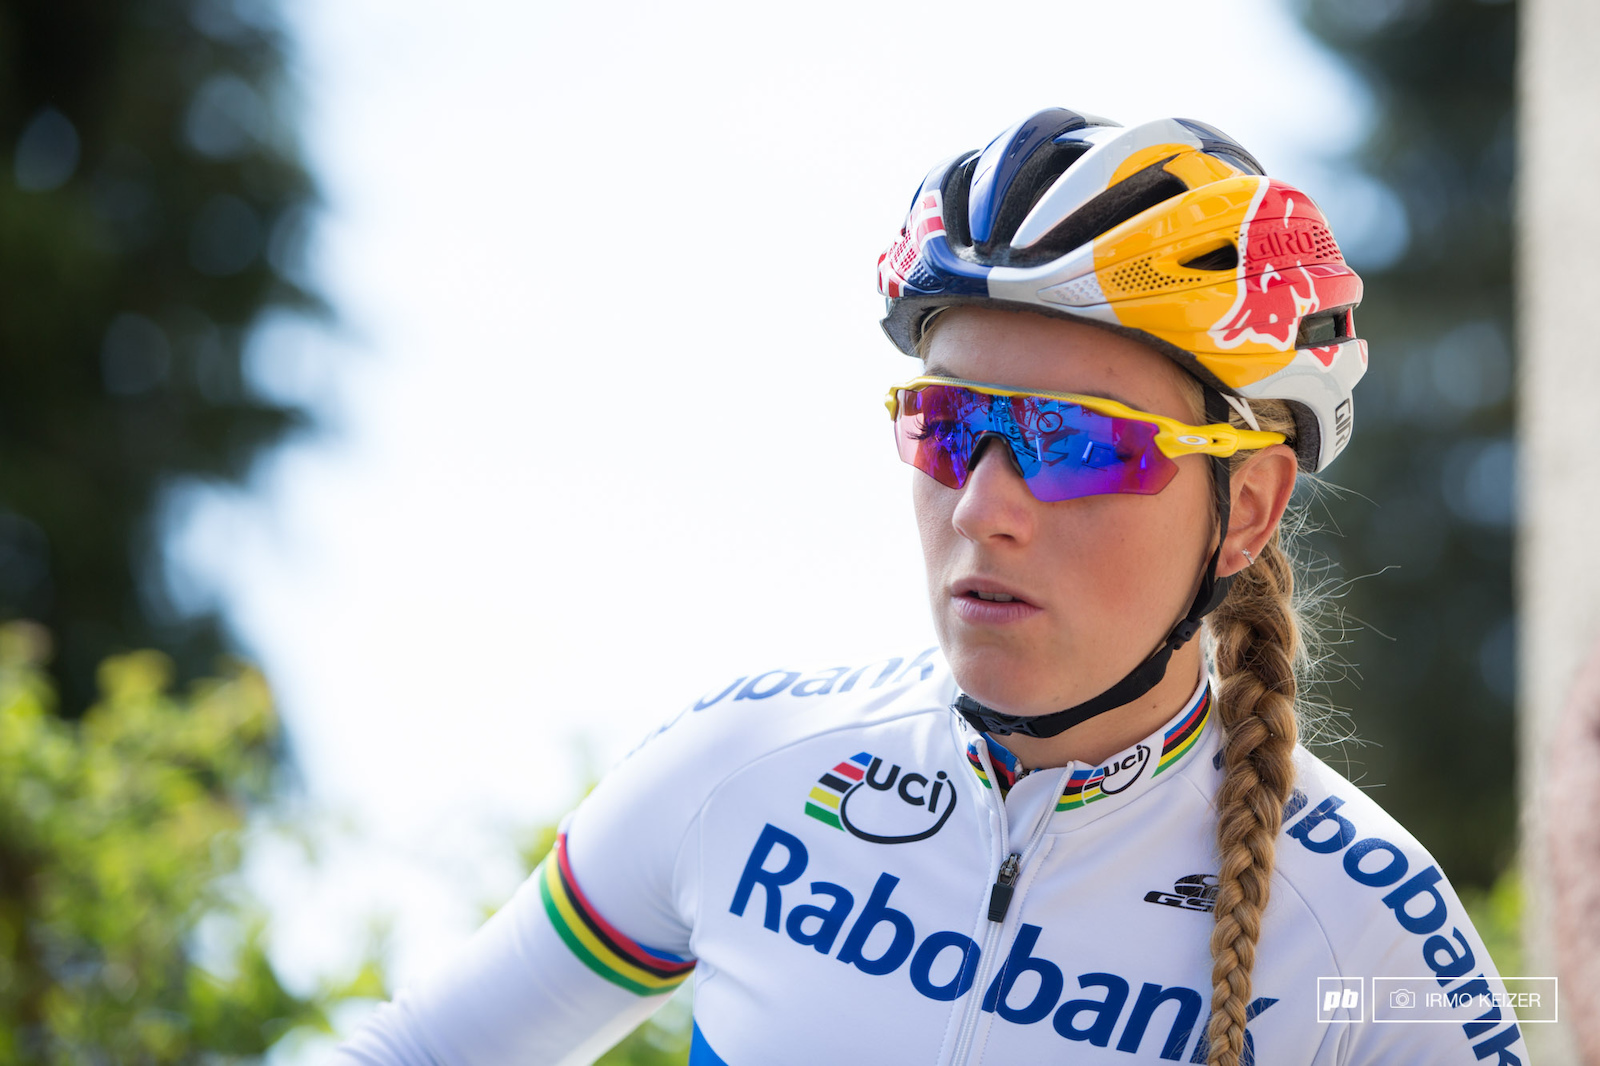 Pauline Ferrand-Prevot is back in business after a broken knee forced her to abandon cycling during the winter.